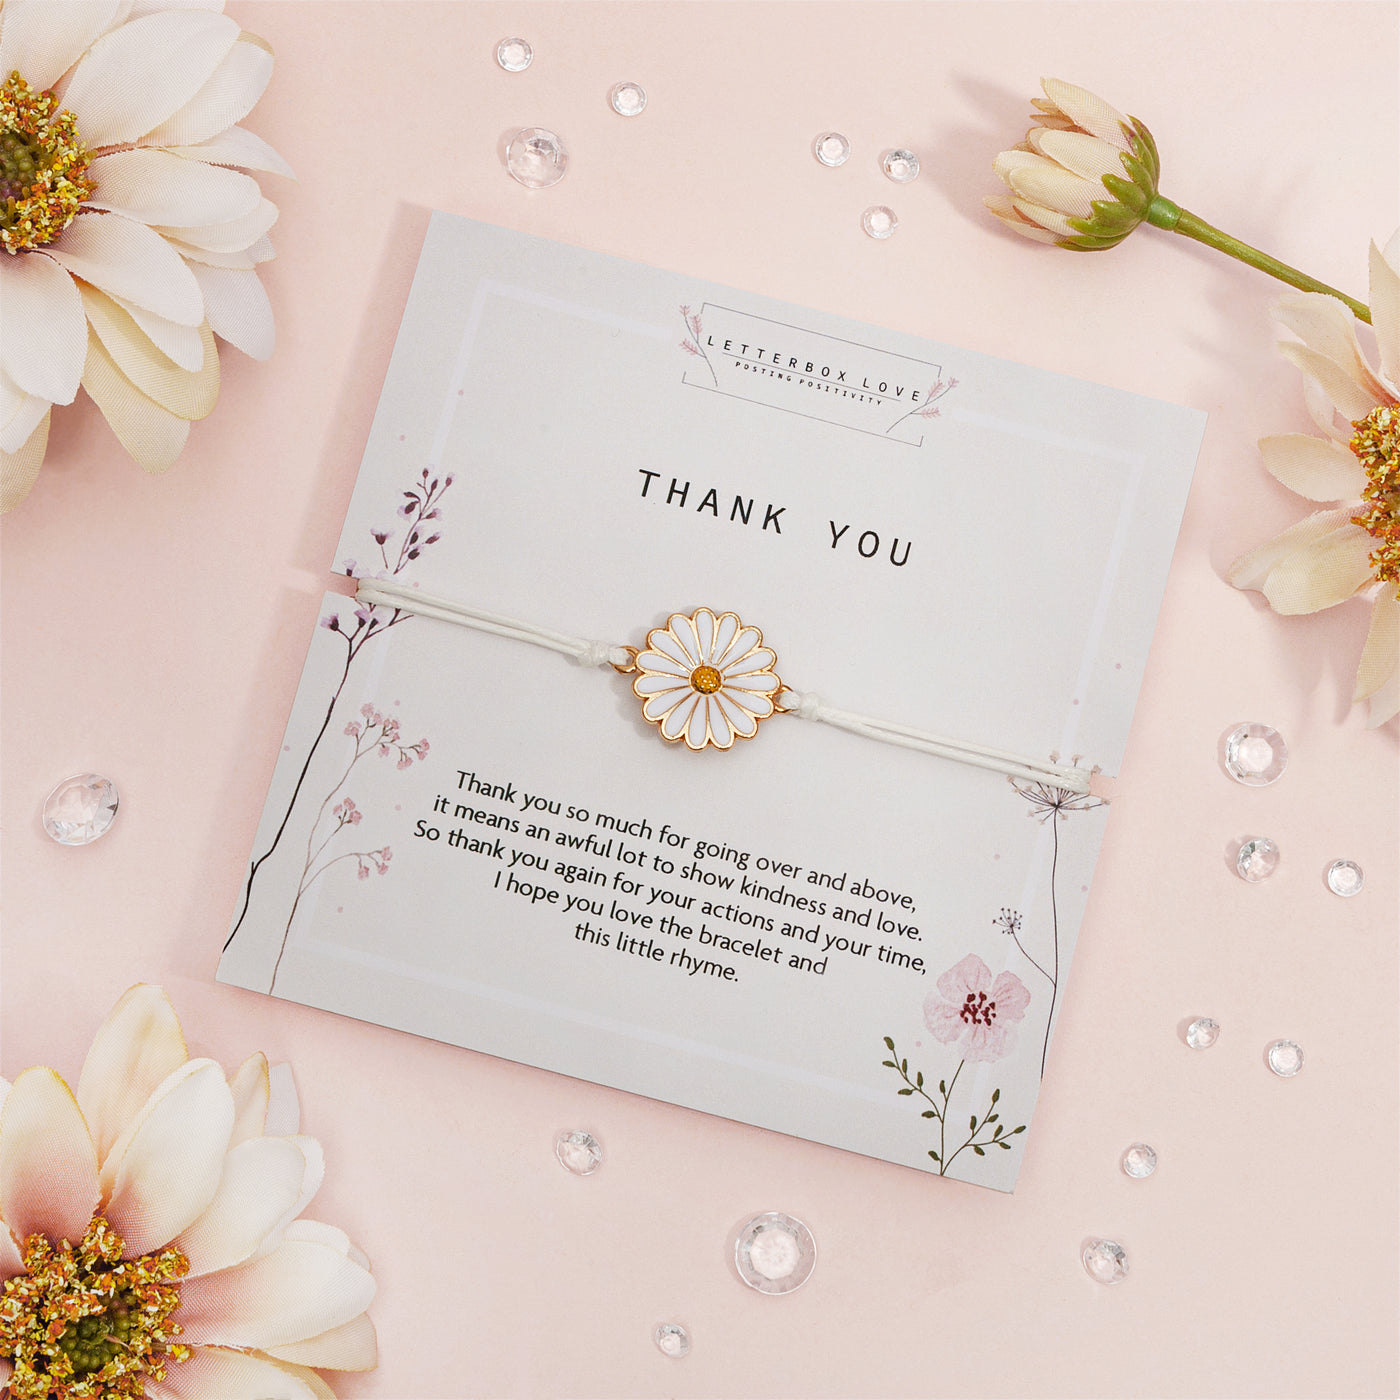 Elegant 'Thank You' card on a blush pink backdrop, adorned with a daisy-inspired bracelet. The card showcases delicate floral illustrations and a heartfelt gratitude message. 